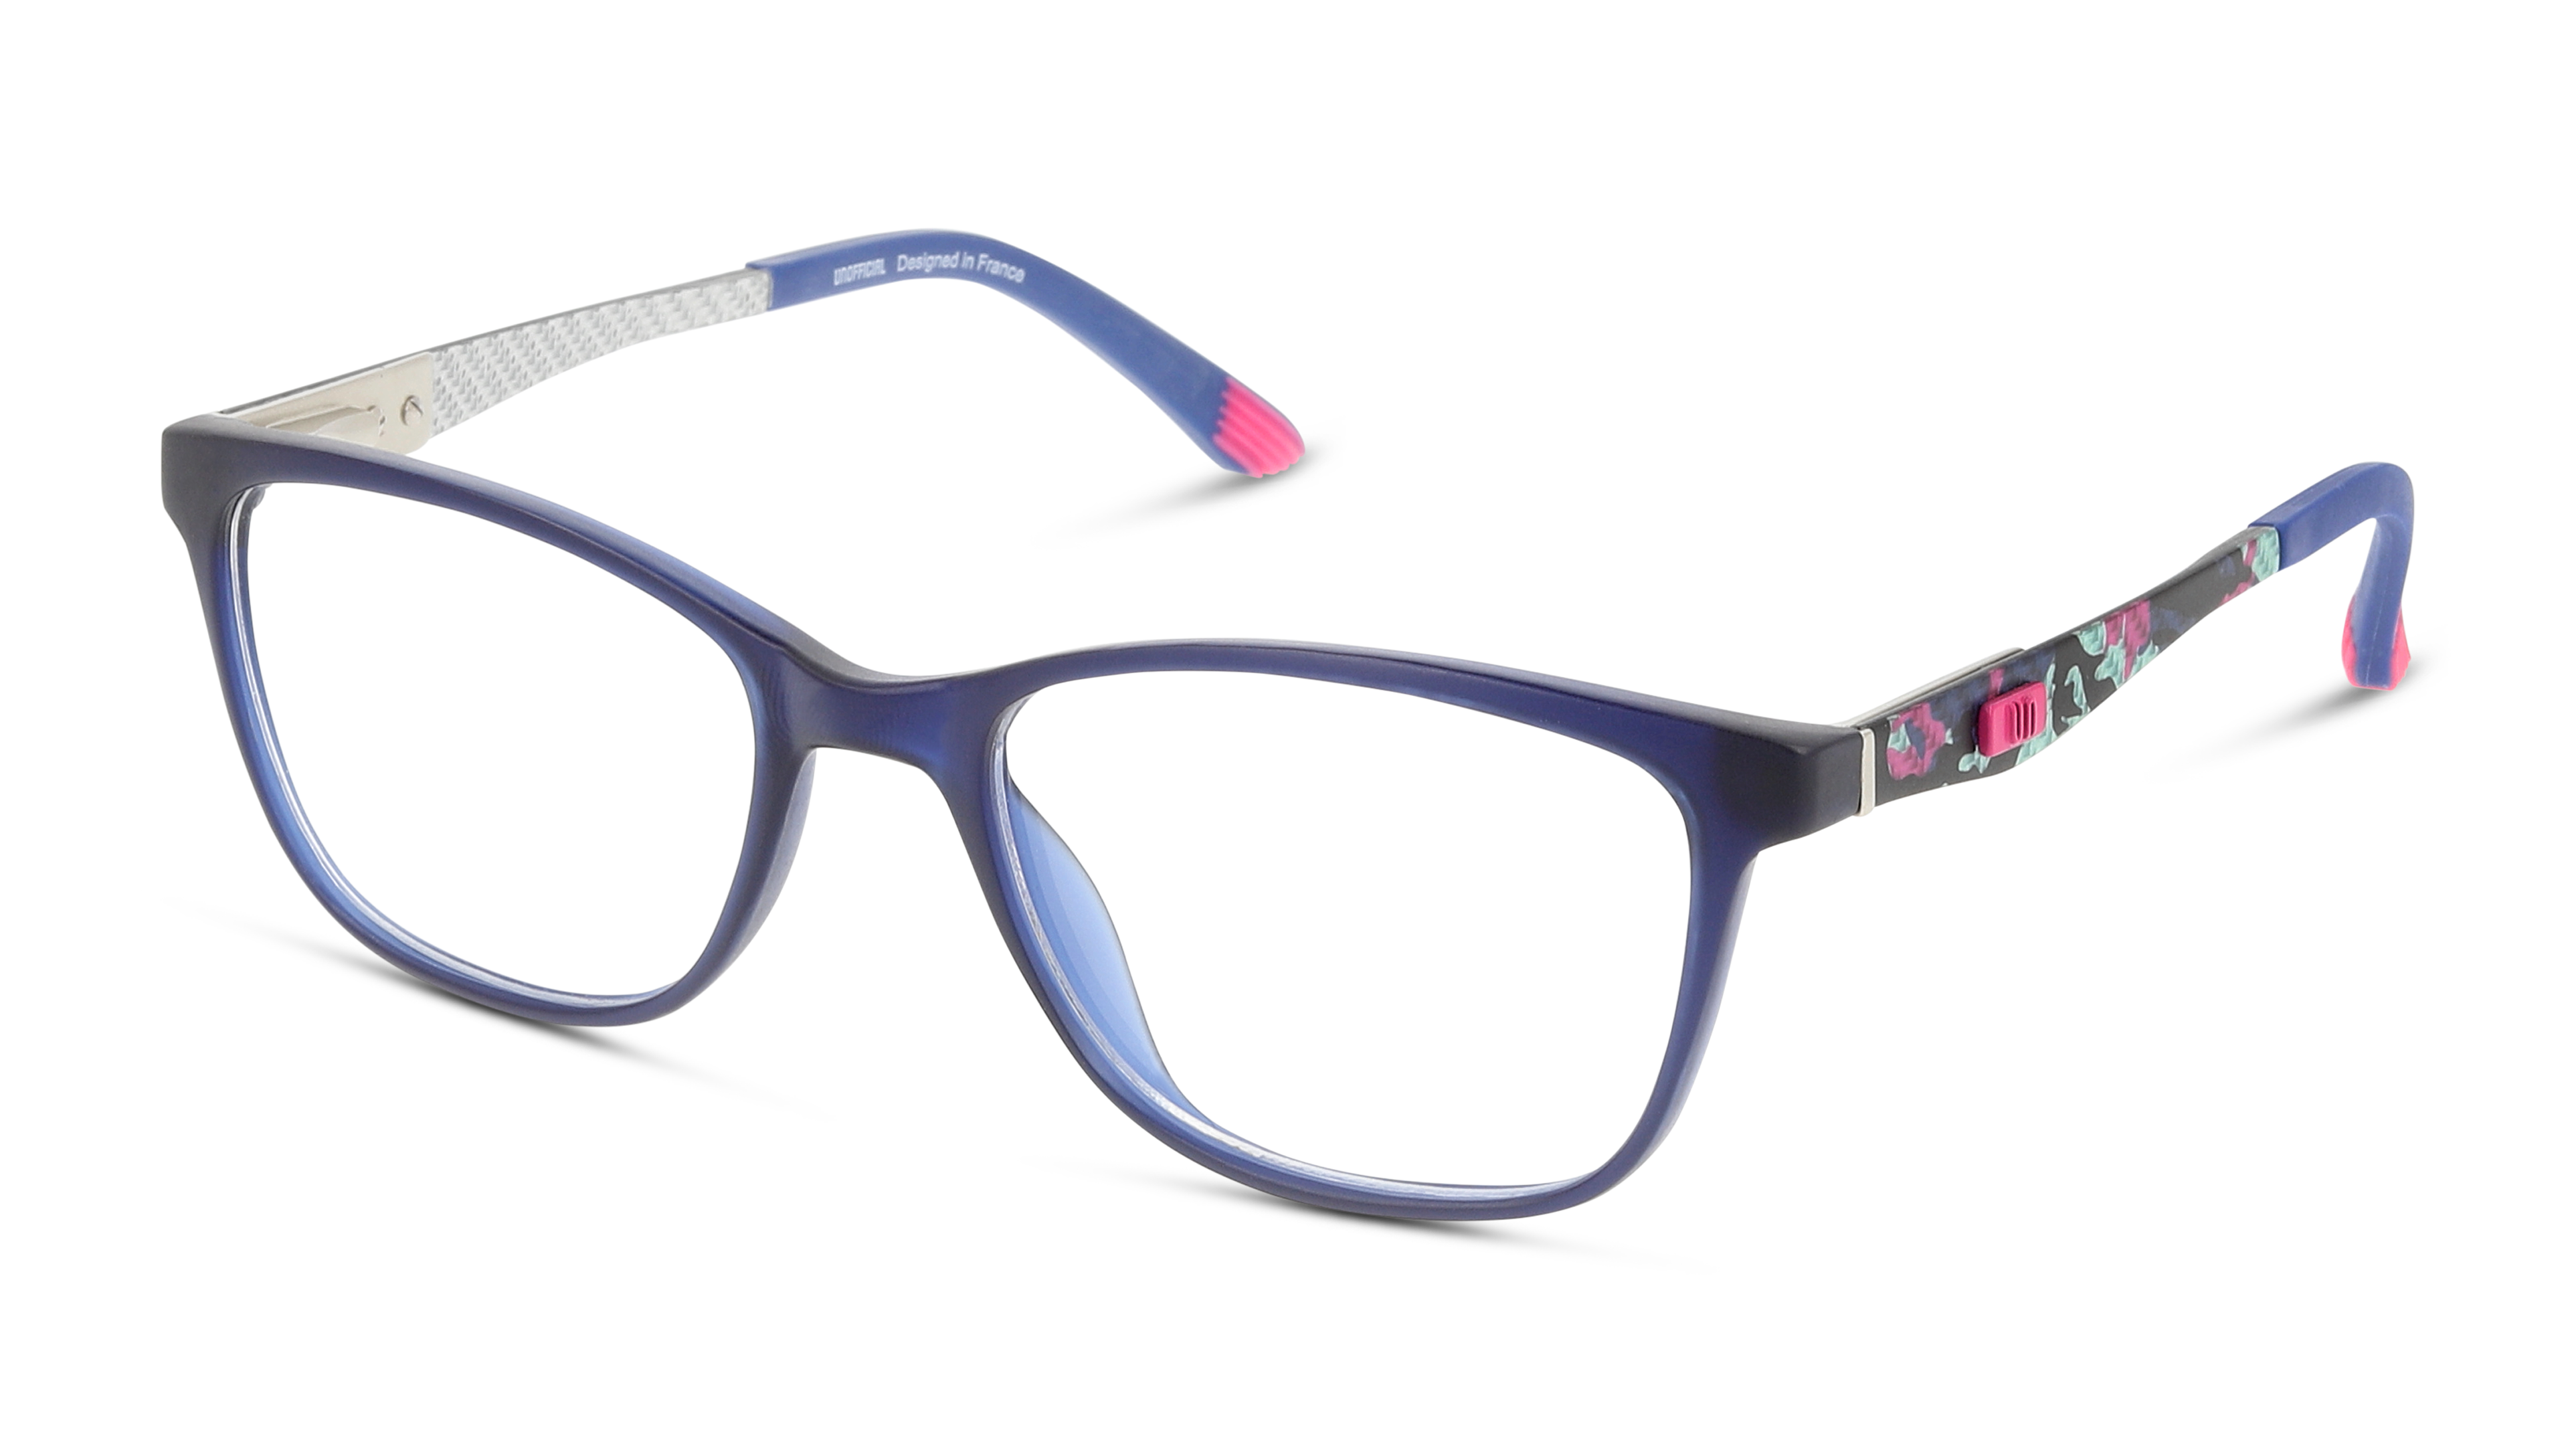 Angle_Left01 Unofficial Youth UNOT0055 (CX00) Youth Glasses Transparent / Blue